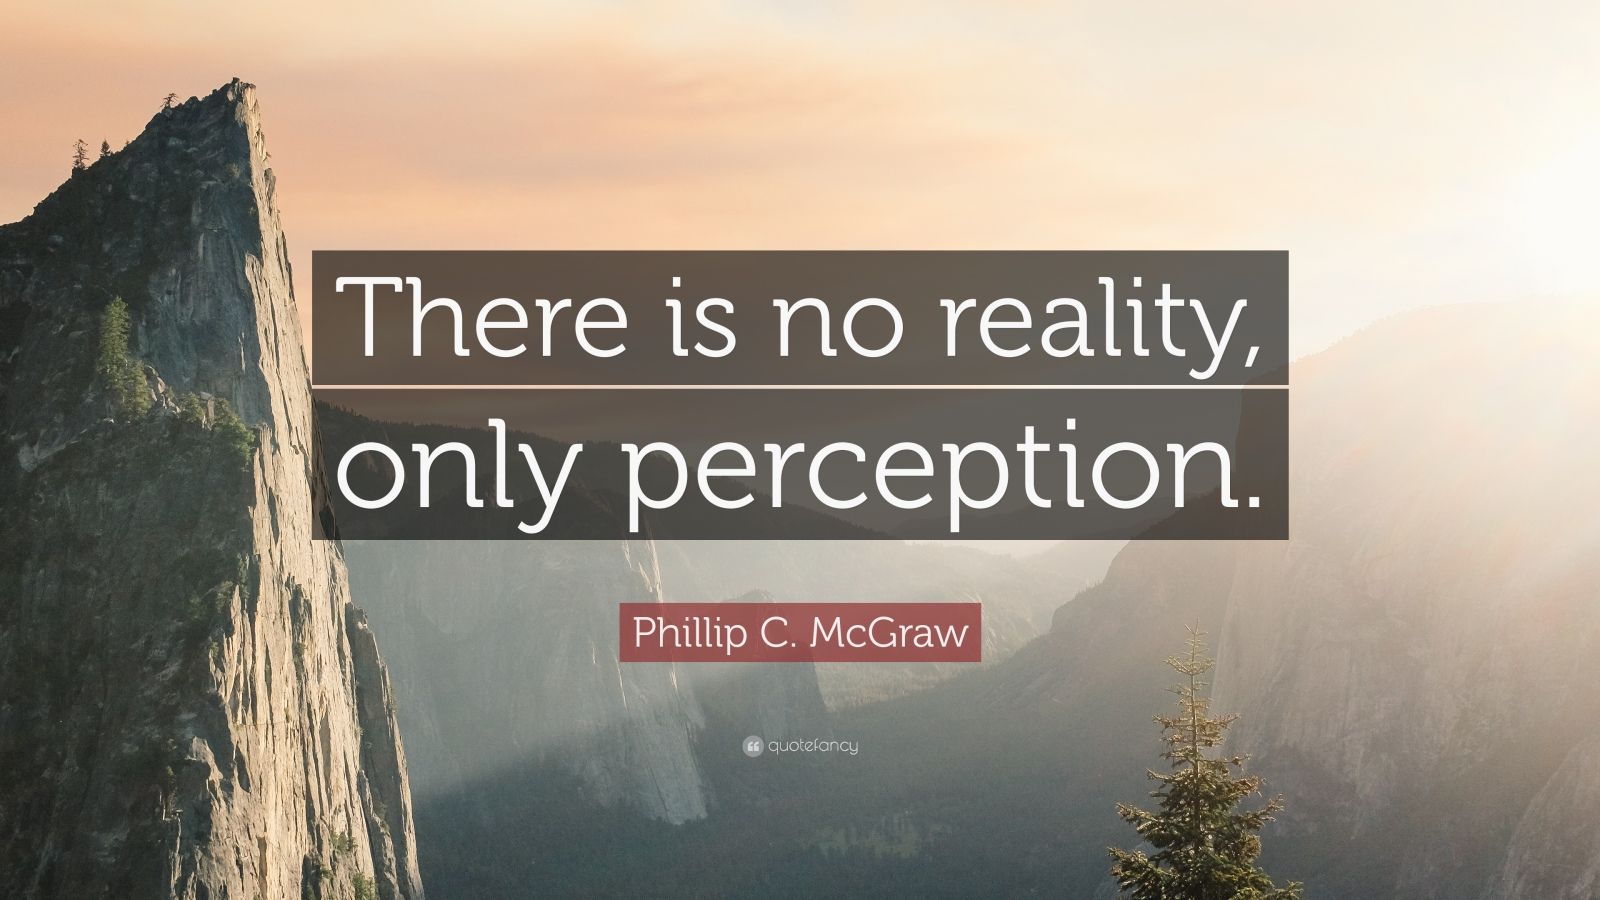 Phillip C. McGraw Quote: “There is no reality, only perception.” (7 ...